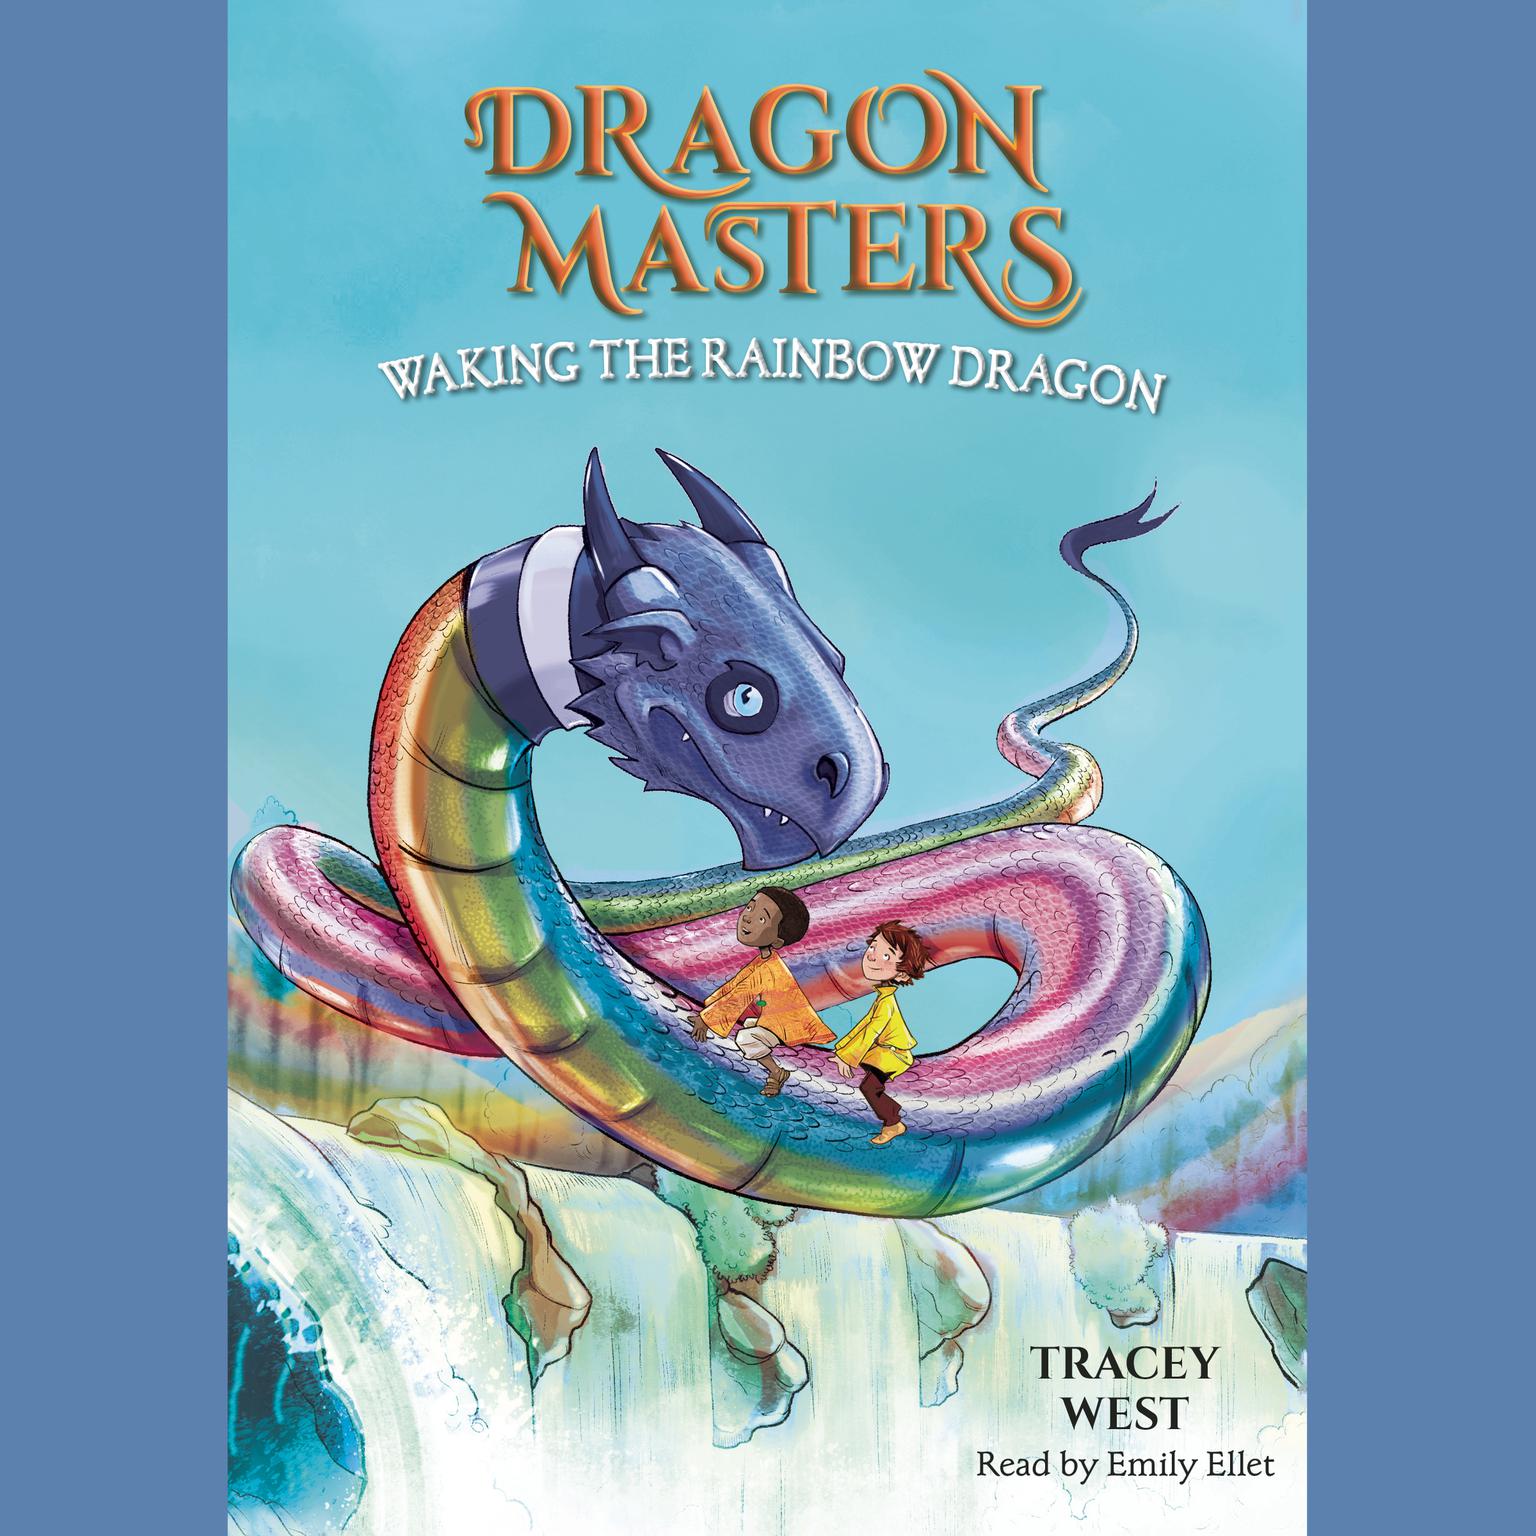 Waking the Rainbow Dragon: A Branches Book (Dragon Masters #10) Audiobook, by Tracey West